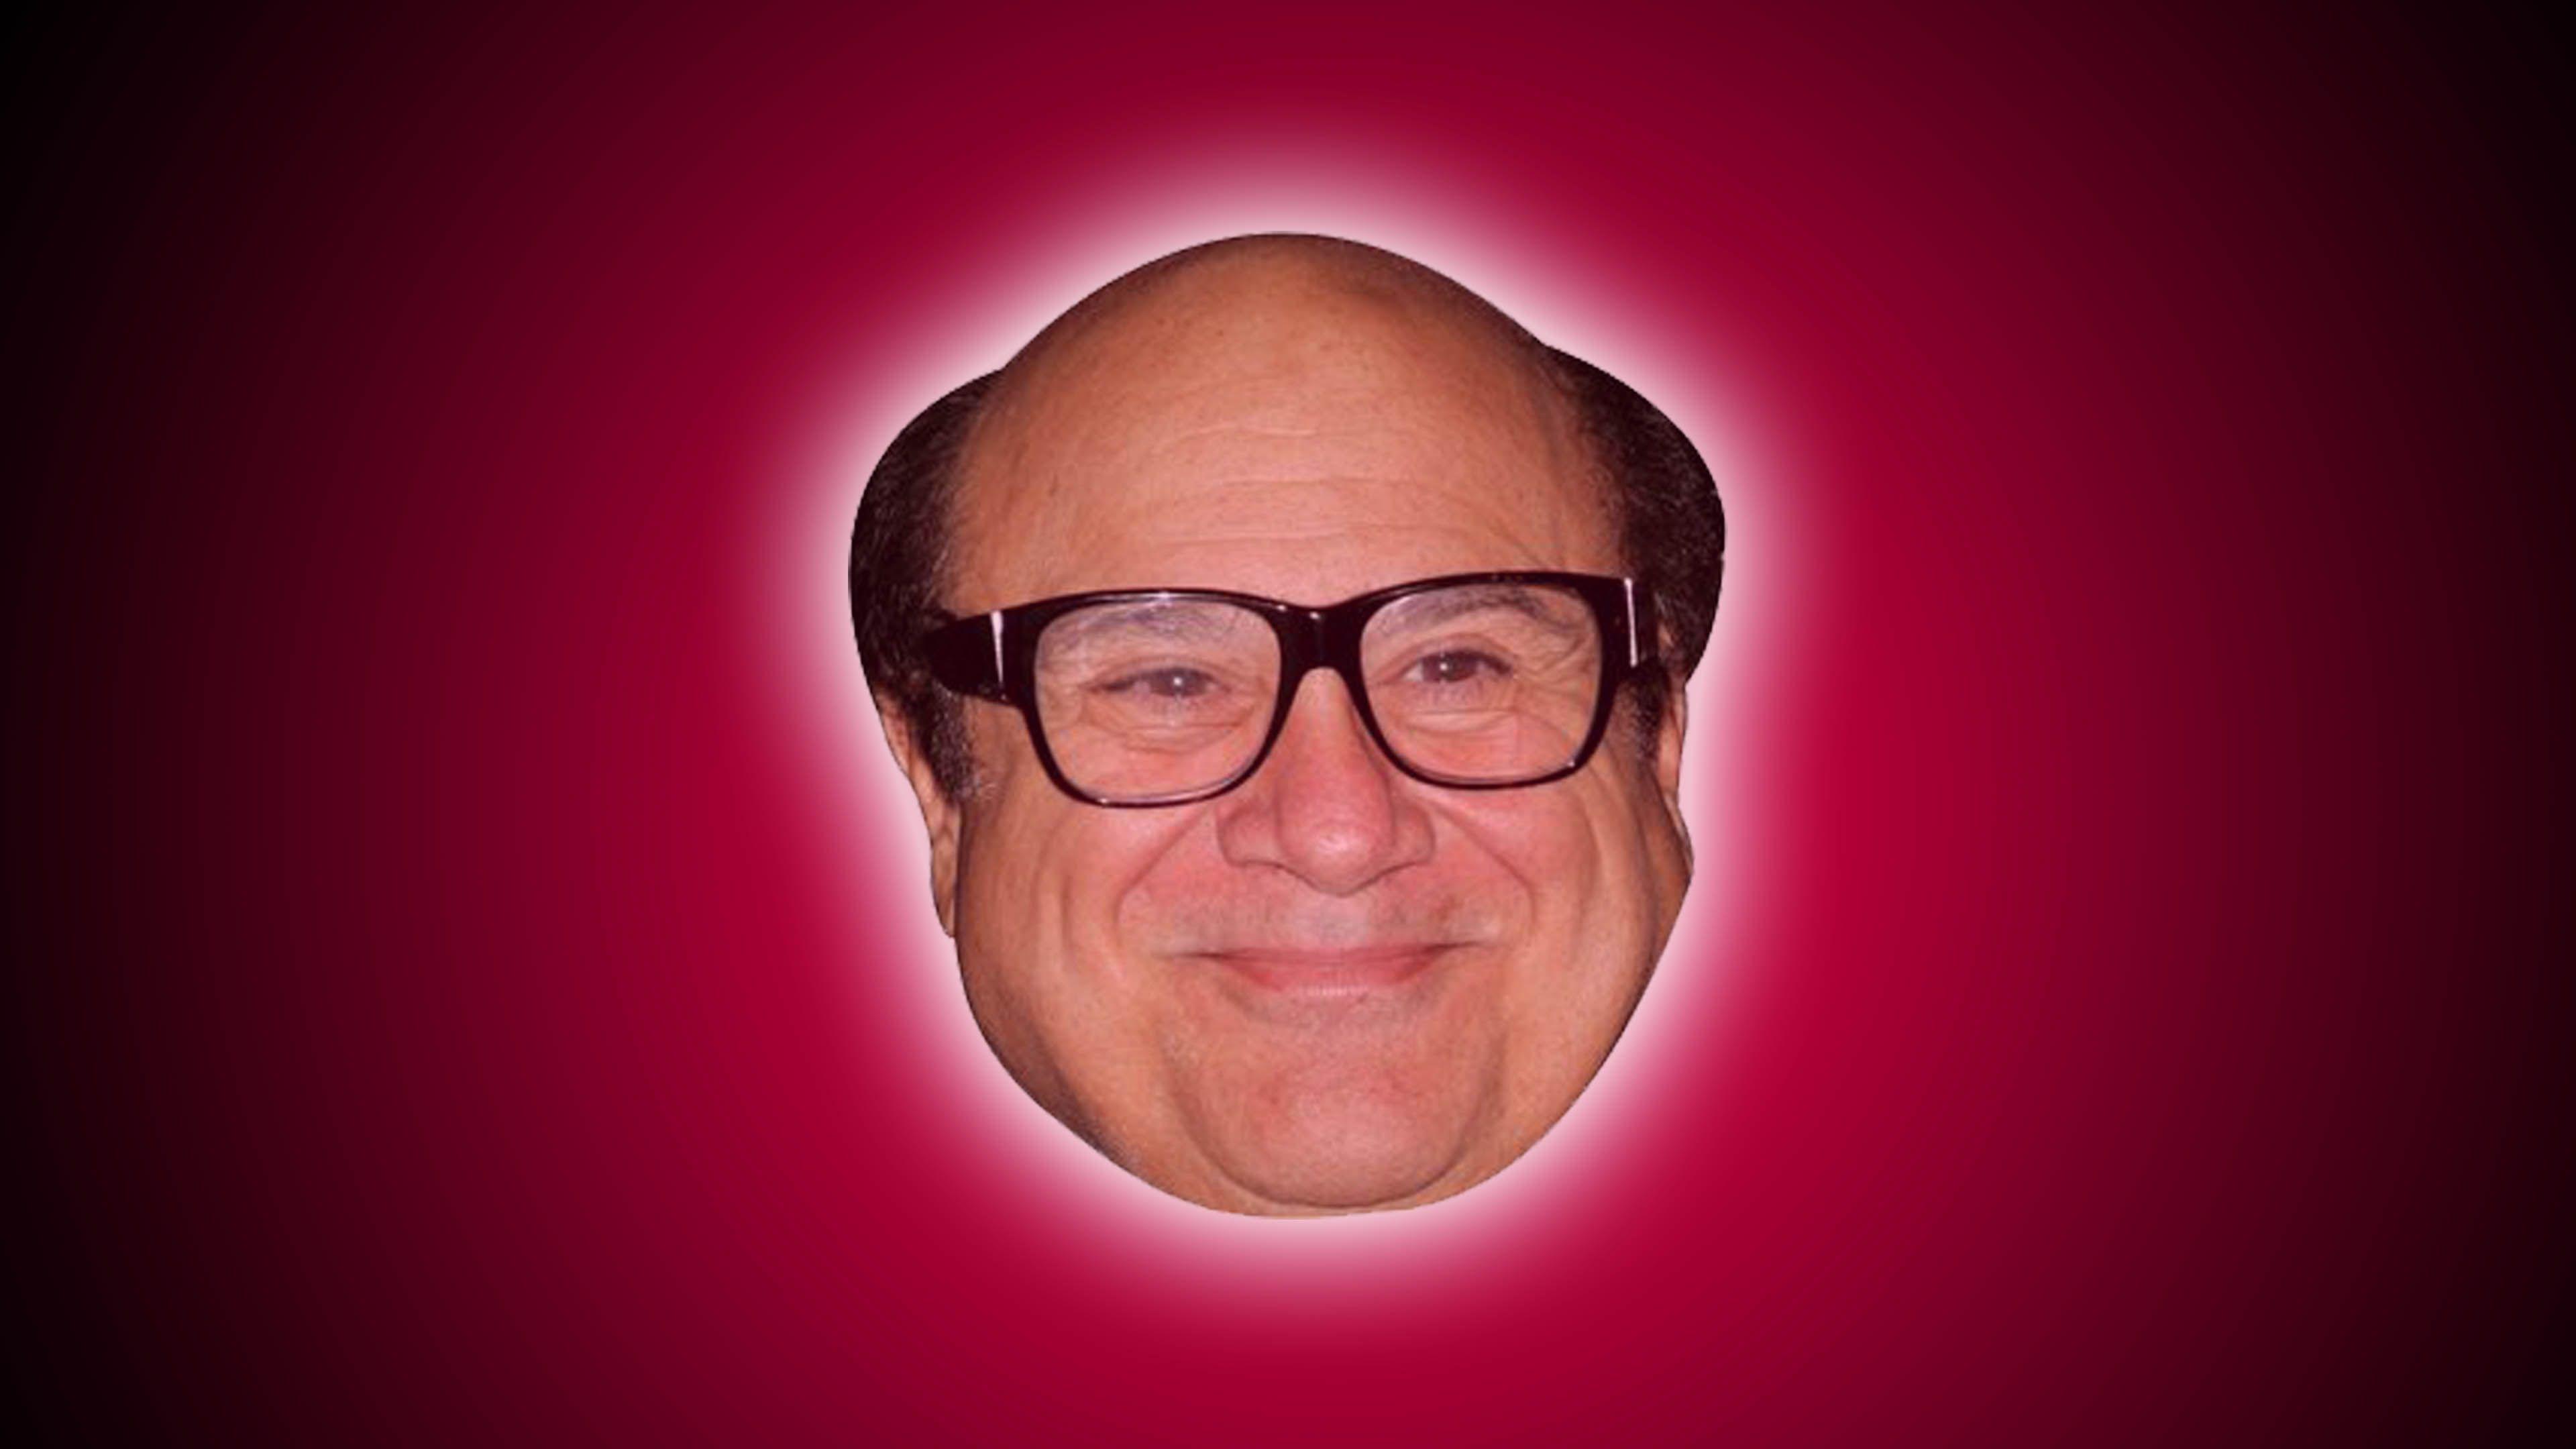 Download Danny Devito wallpapers for mobile phone free Danny Devito HD  pictures